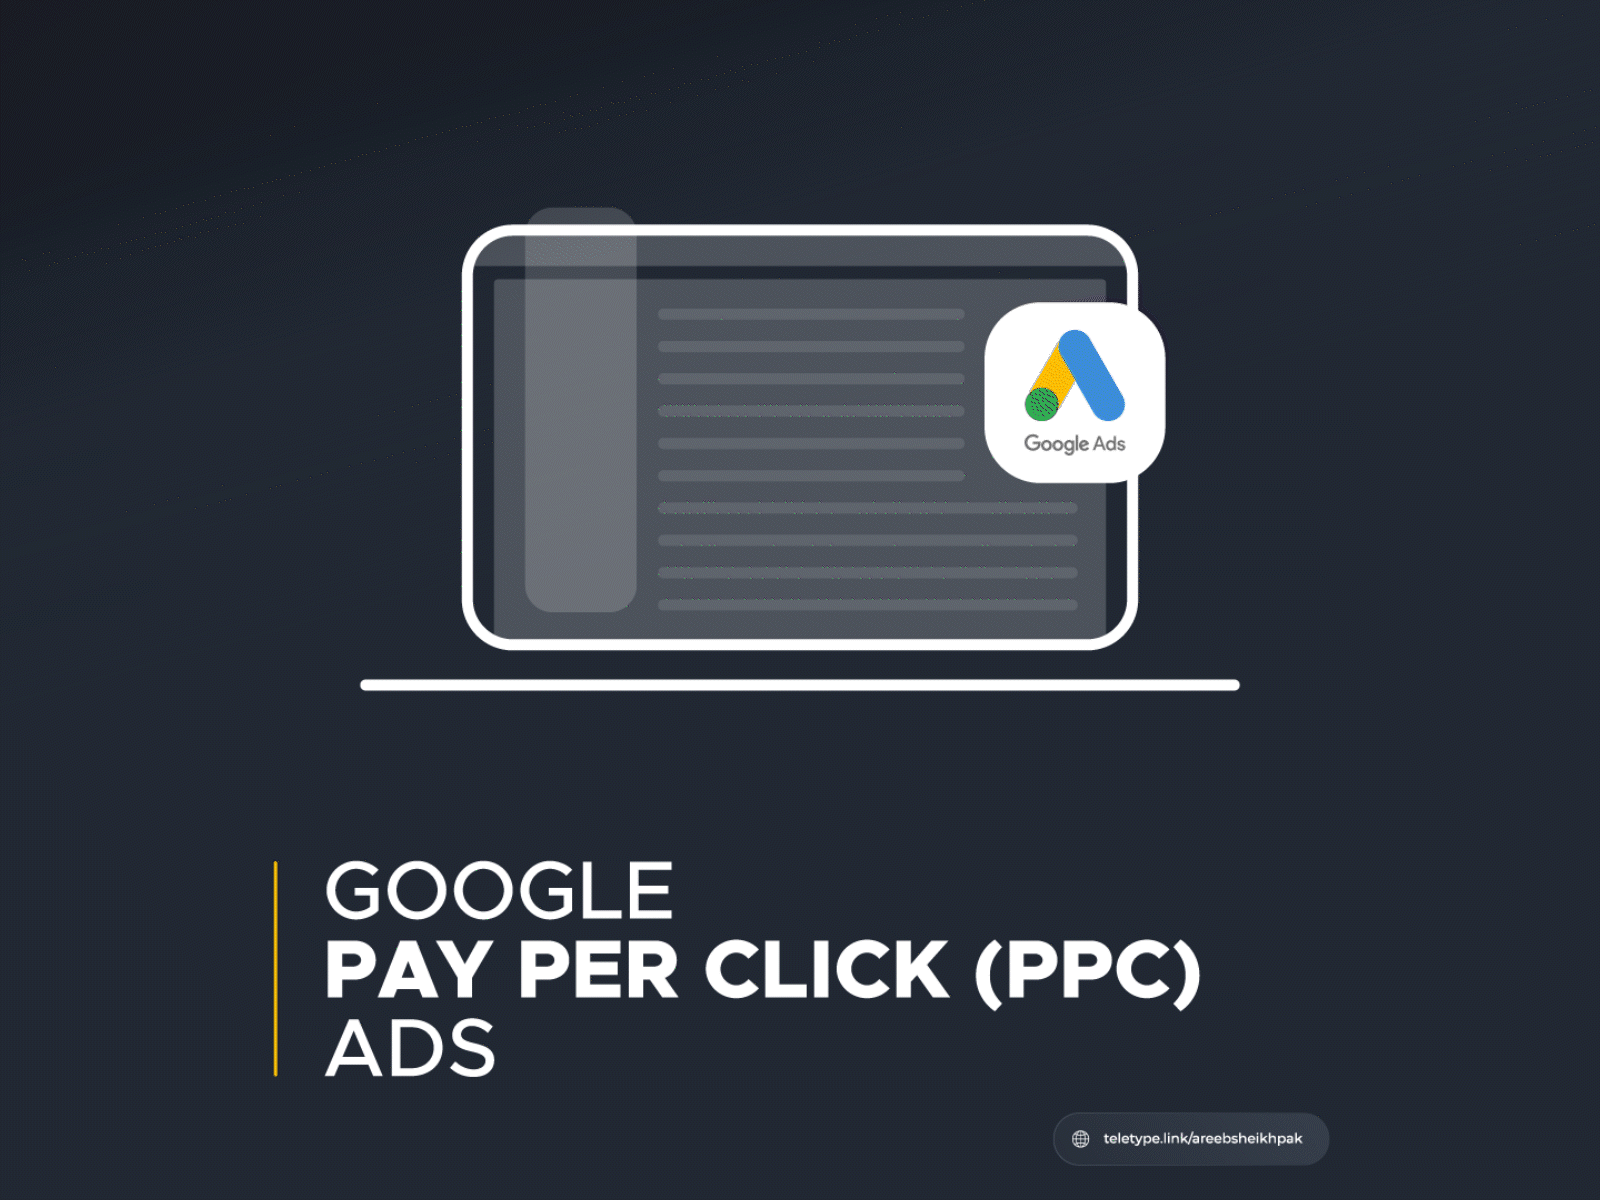 Google PPC Ads Banner ads banner branding google ads google ppc ads graphic design illustrator pay per click pay per click advertising ppc ads ppc advertising ppc banner web banners